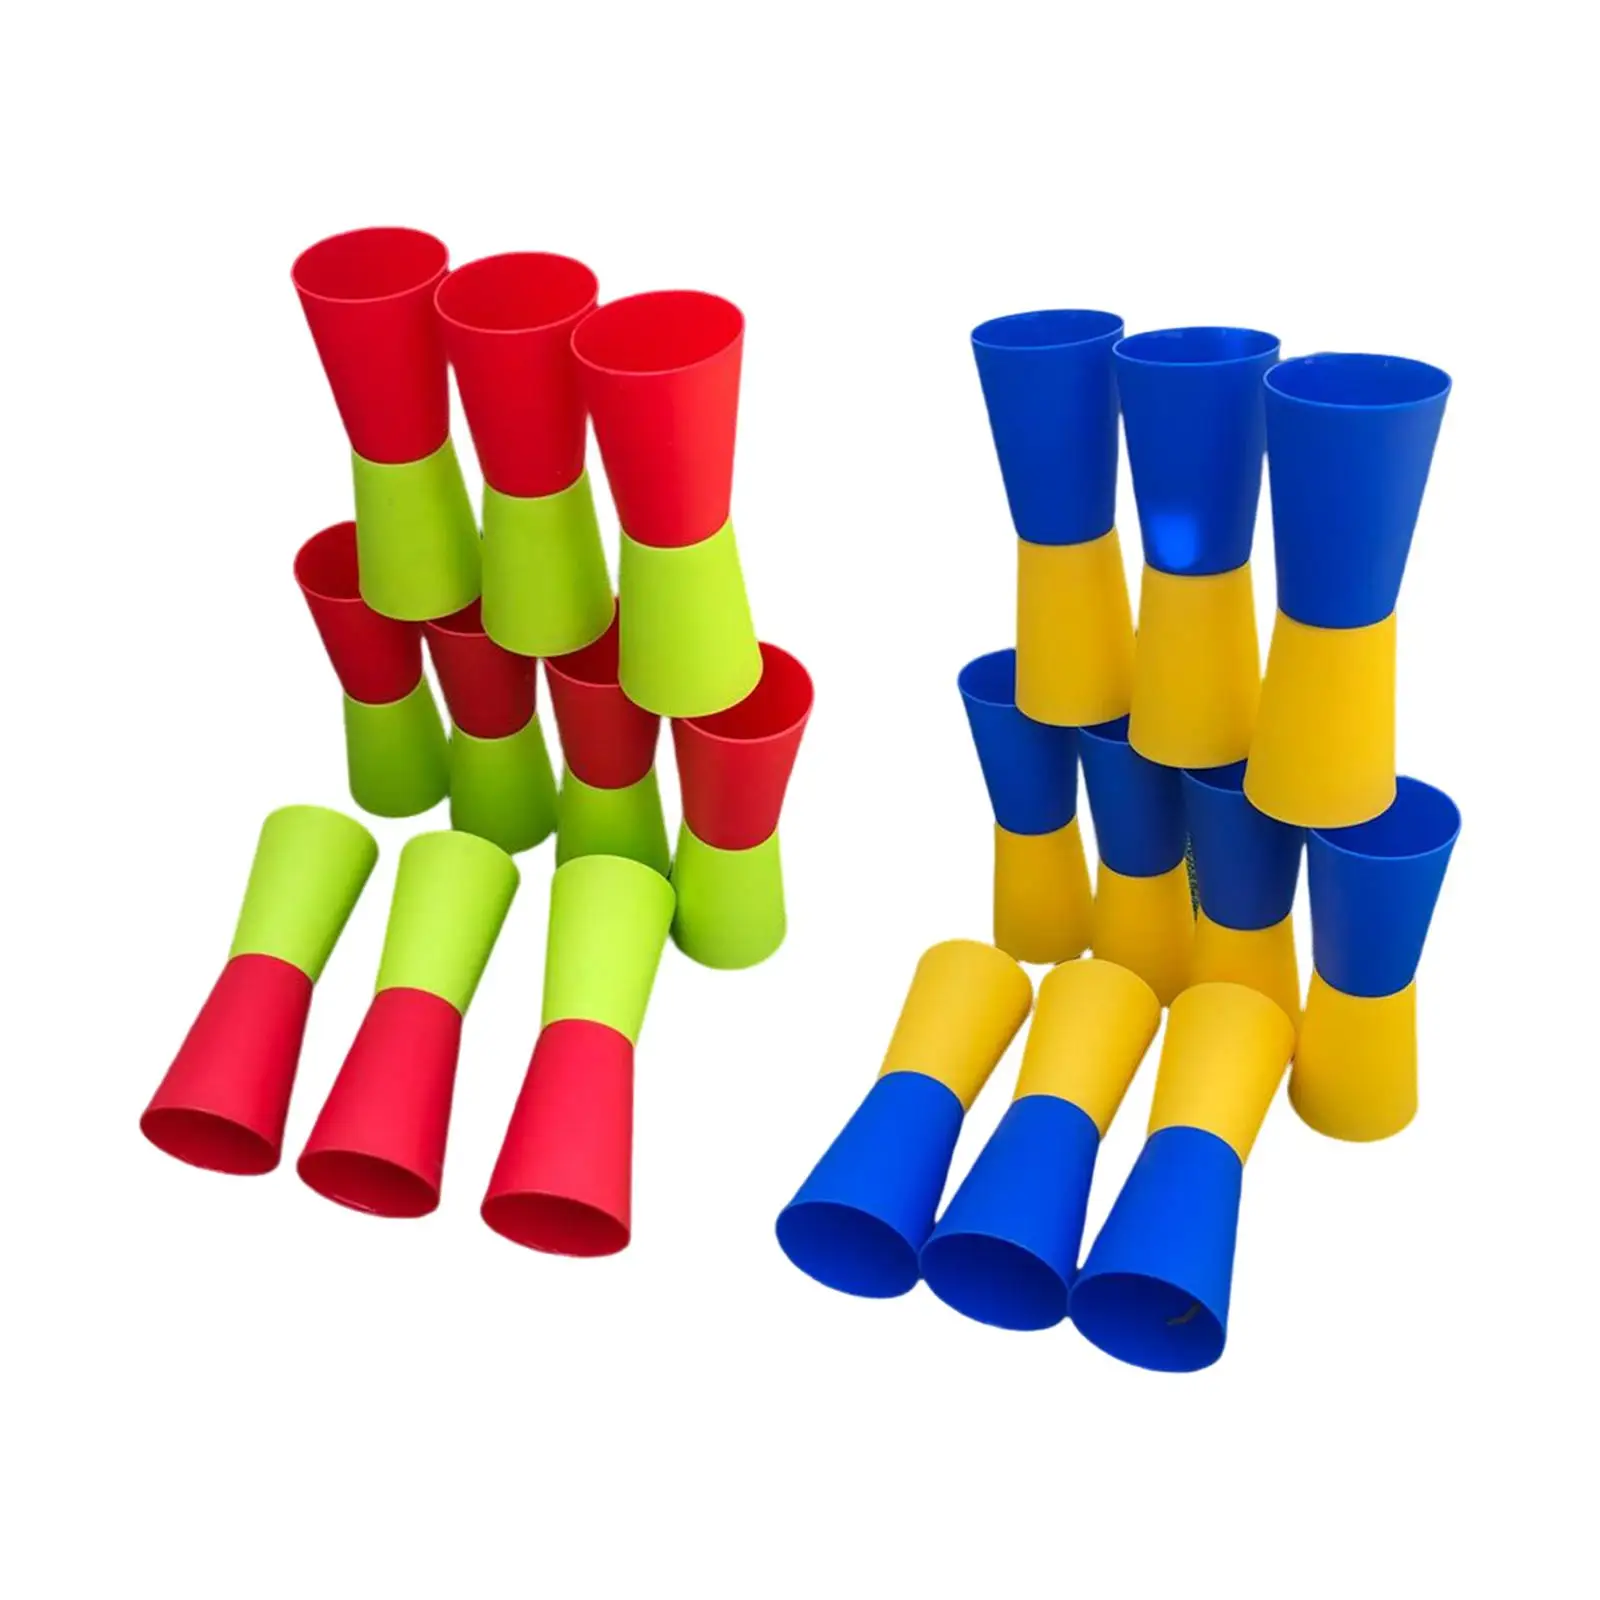 10x Cups Speed Agility Training Exercise Sensory Integration Running Aid  Cups